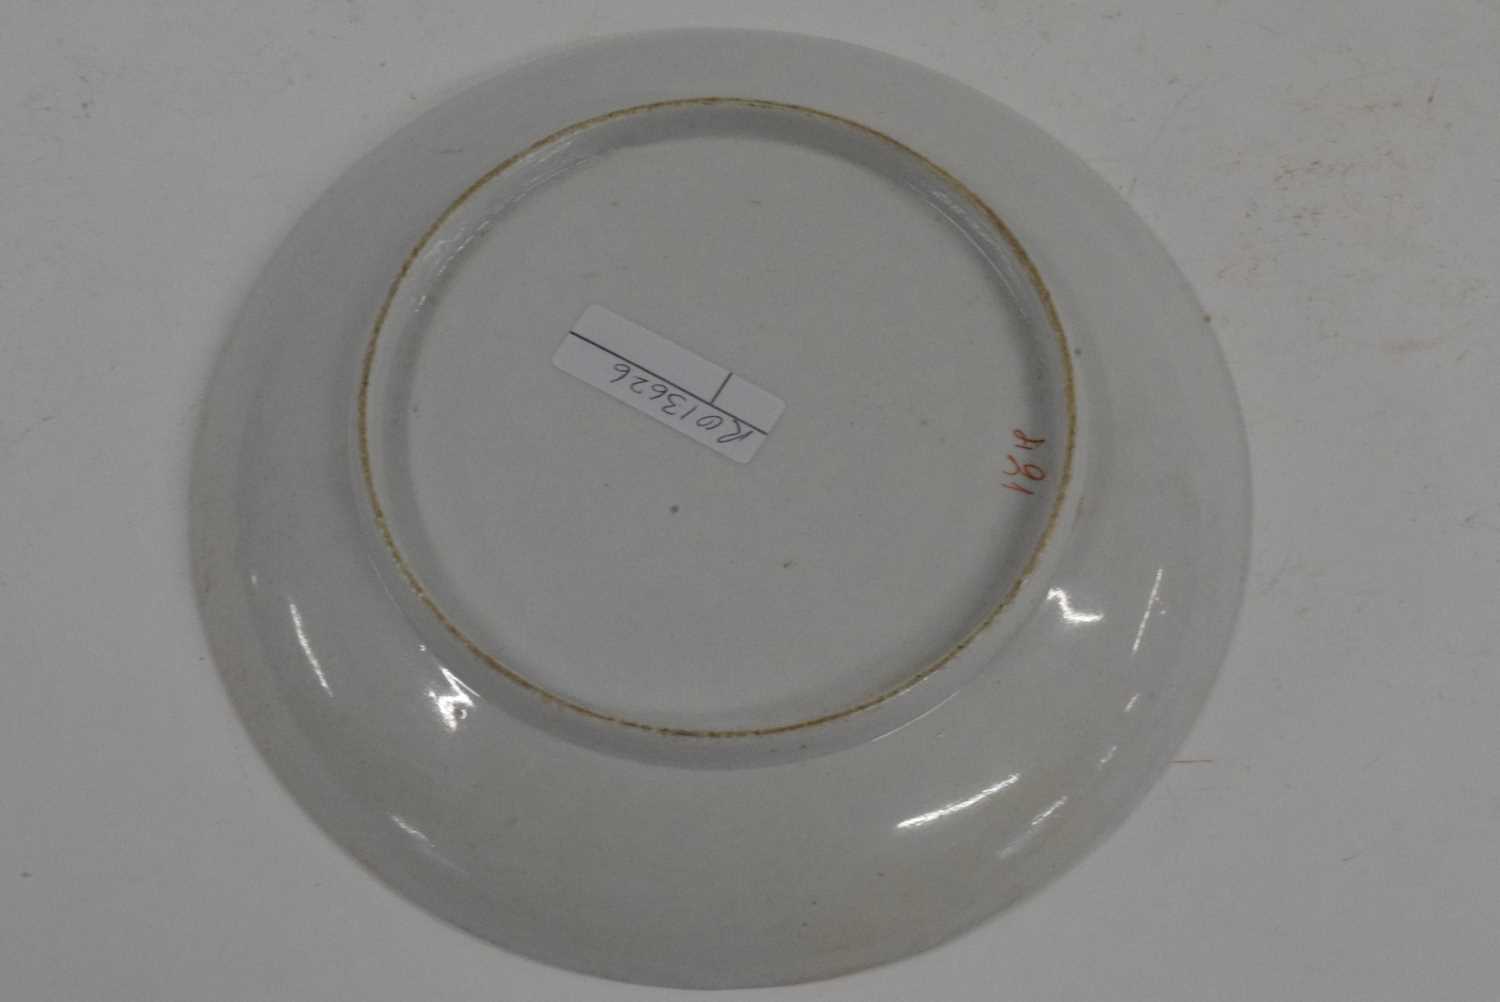 A New Hall dish decorated with the boy and bug pattern, 21cm diameter - Image 2 of 2